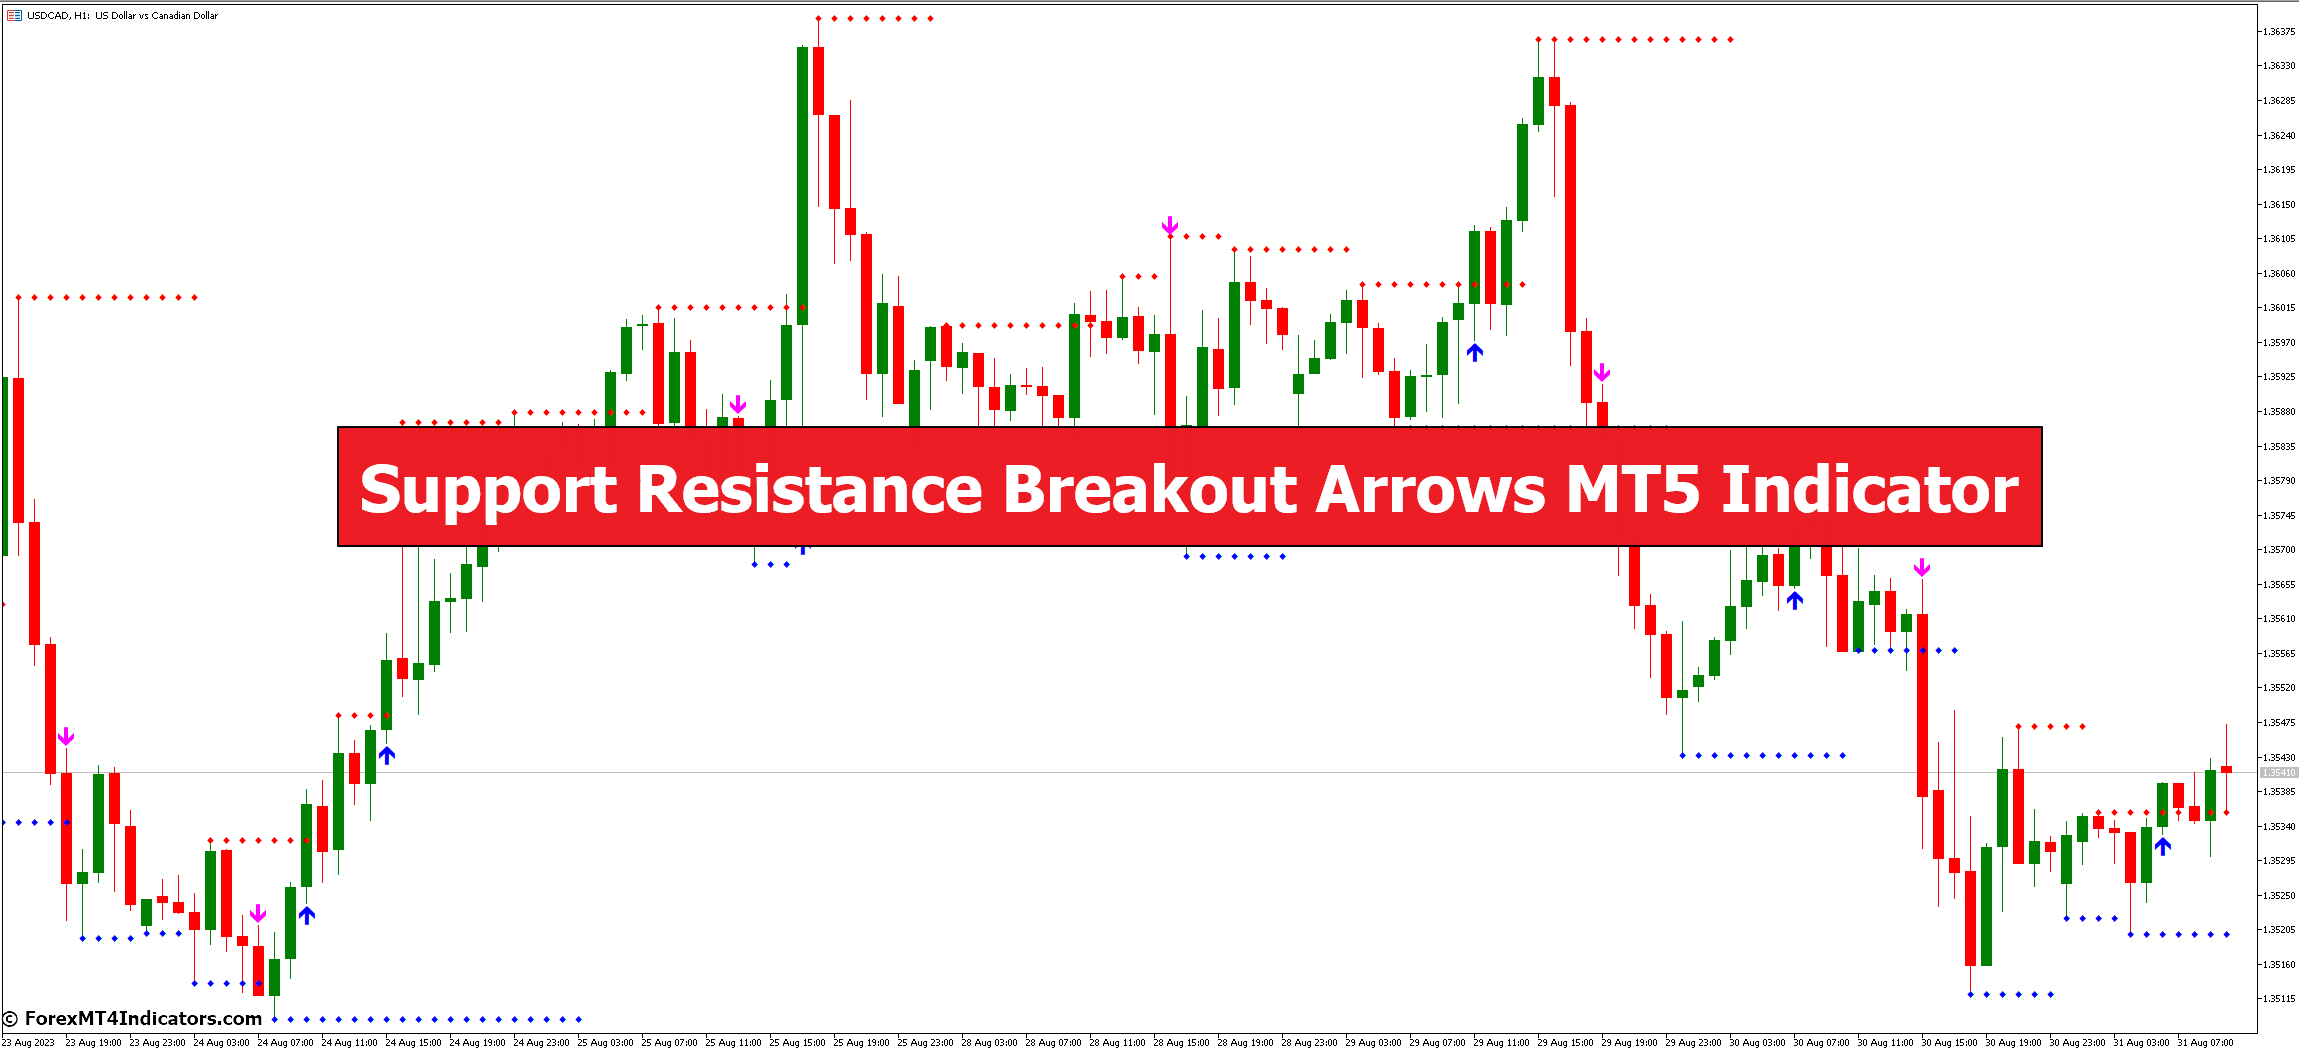 Support Resistance Breakout Arrows MT5 Indicator